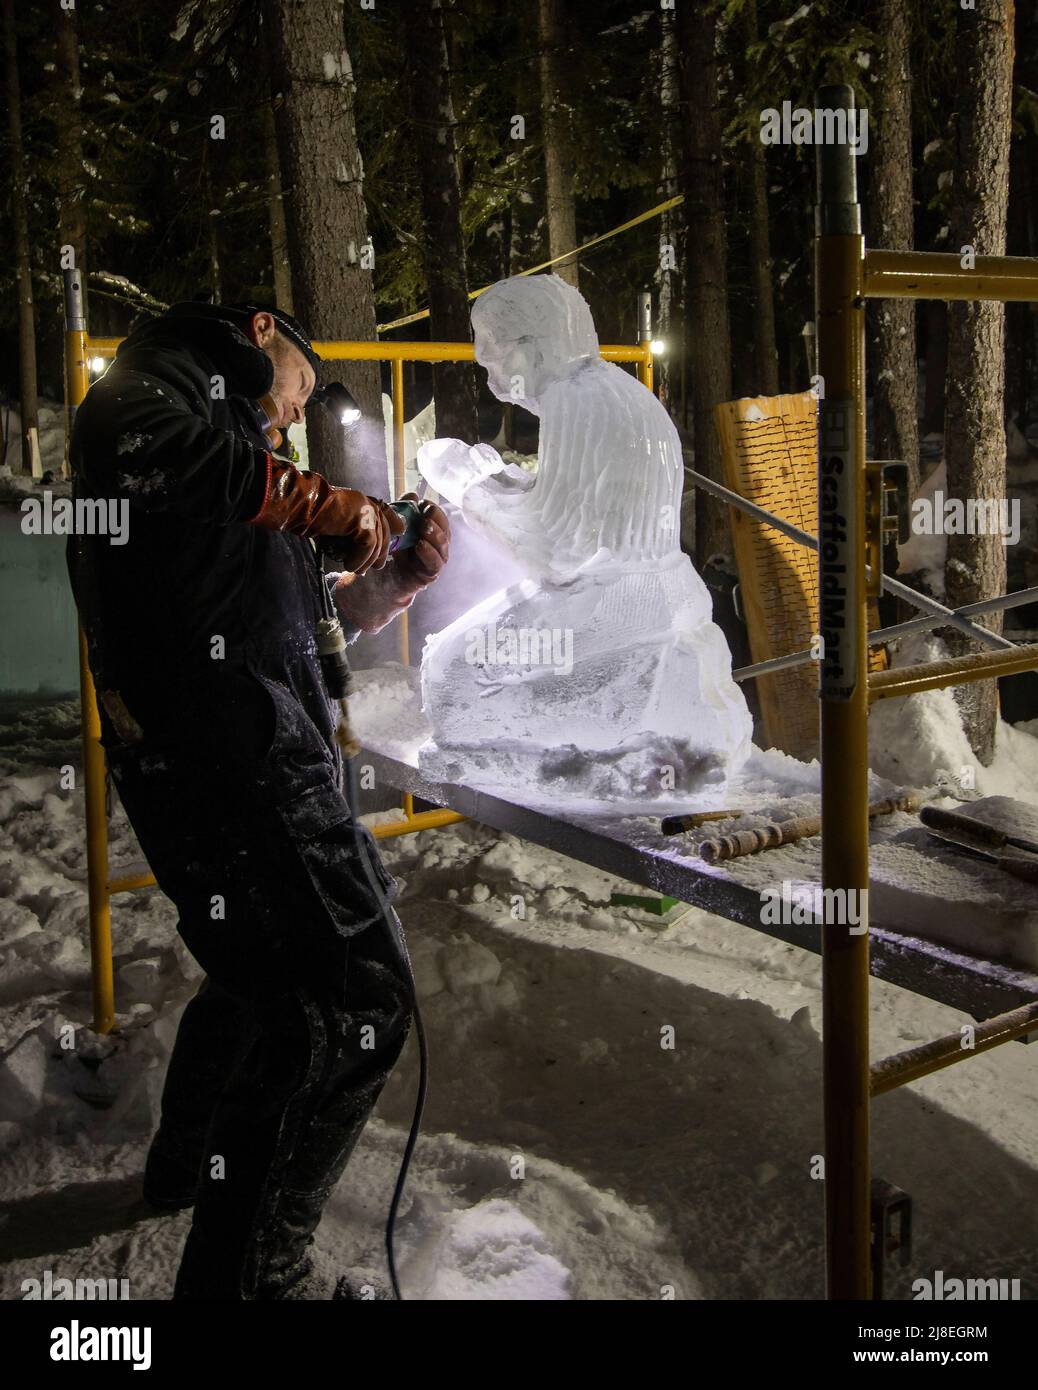 Man sculpts ice on one of many ice carvngs seen at World Ice Art Championships outside Fairbanks, AK, in February. Stock Photo